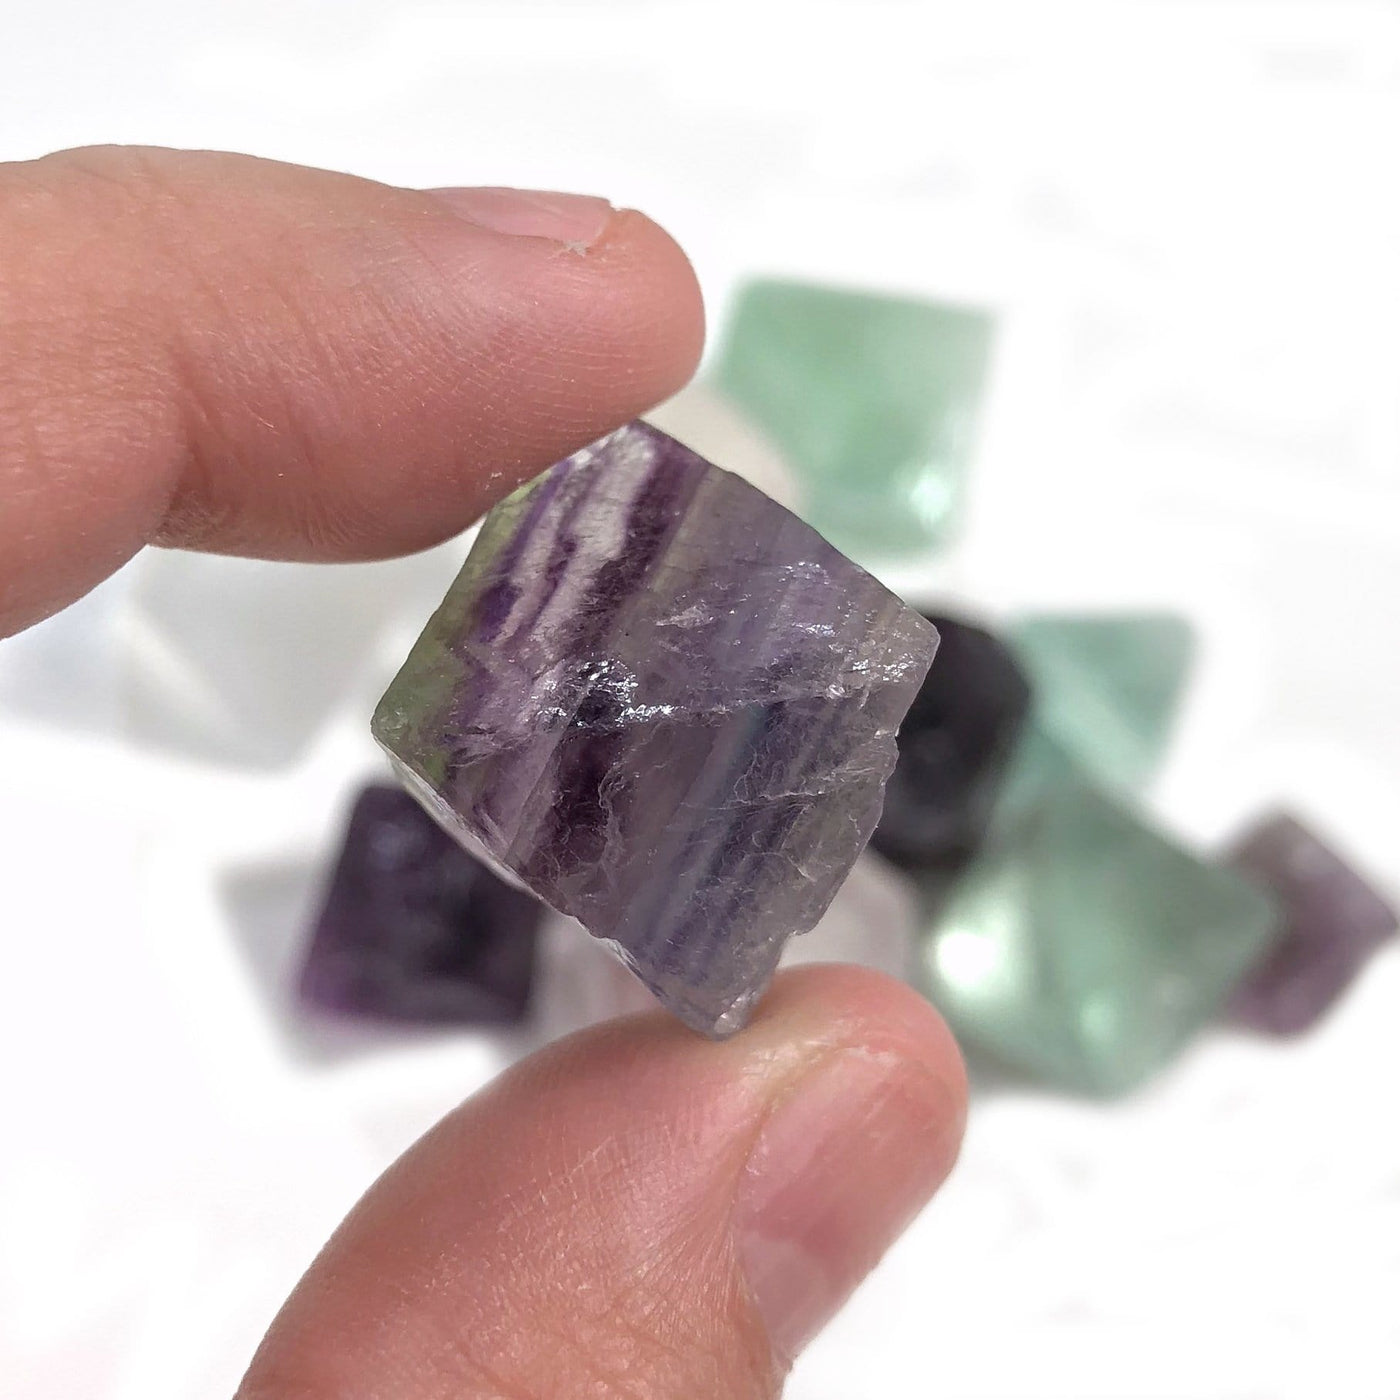 Fingers holding up 1 Rainbow Fluorite Octahedron Cube with other Rainbow Fluorite Octahedron Cubes blurred in the background